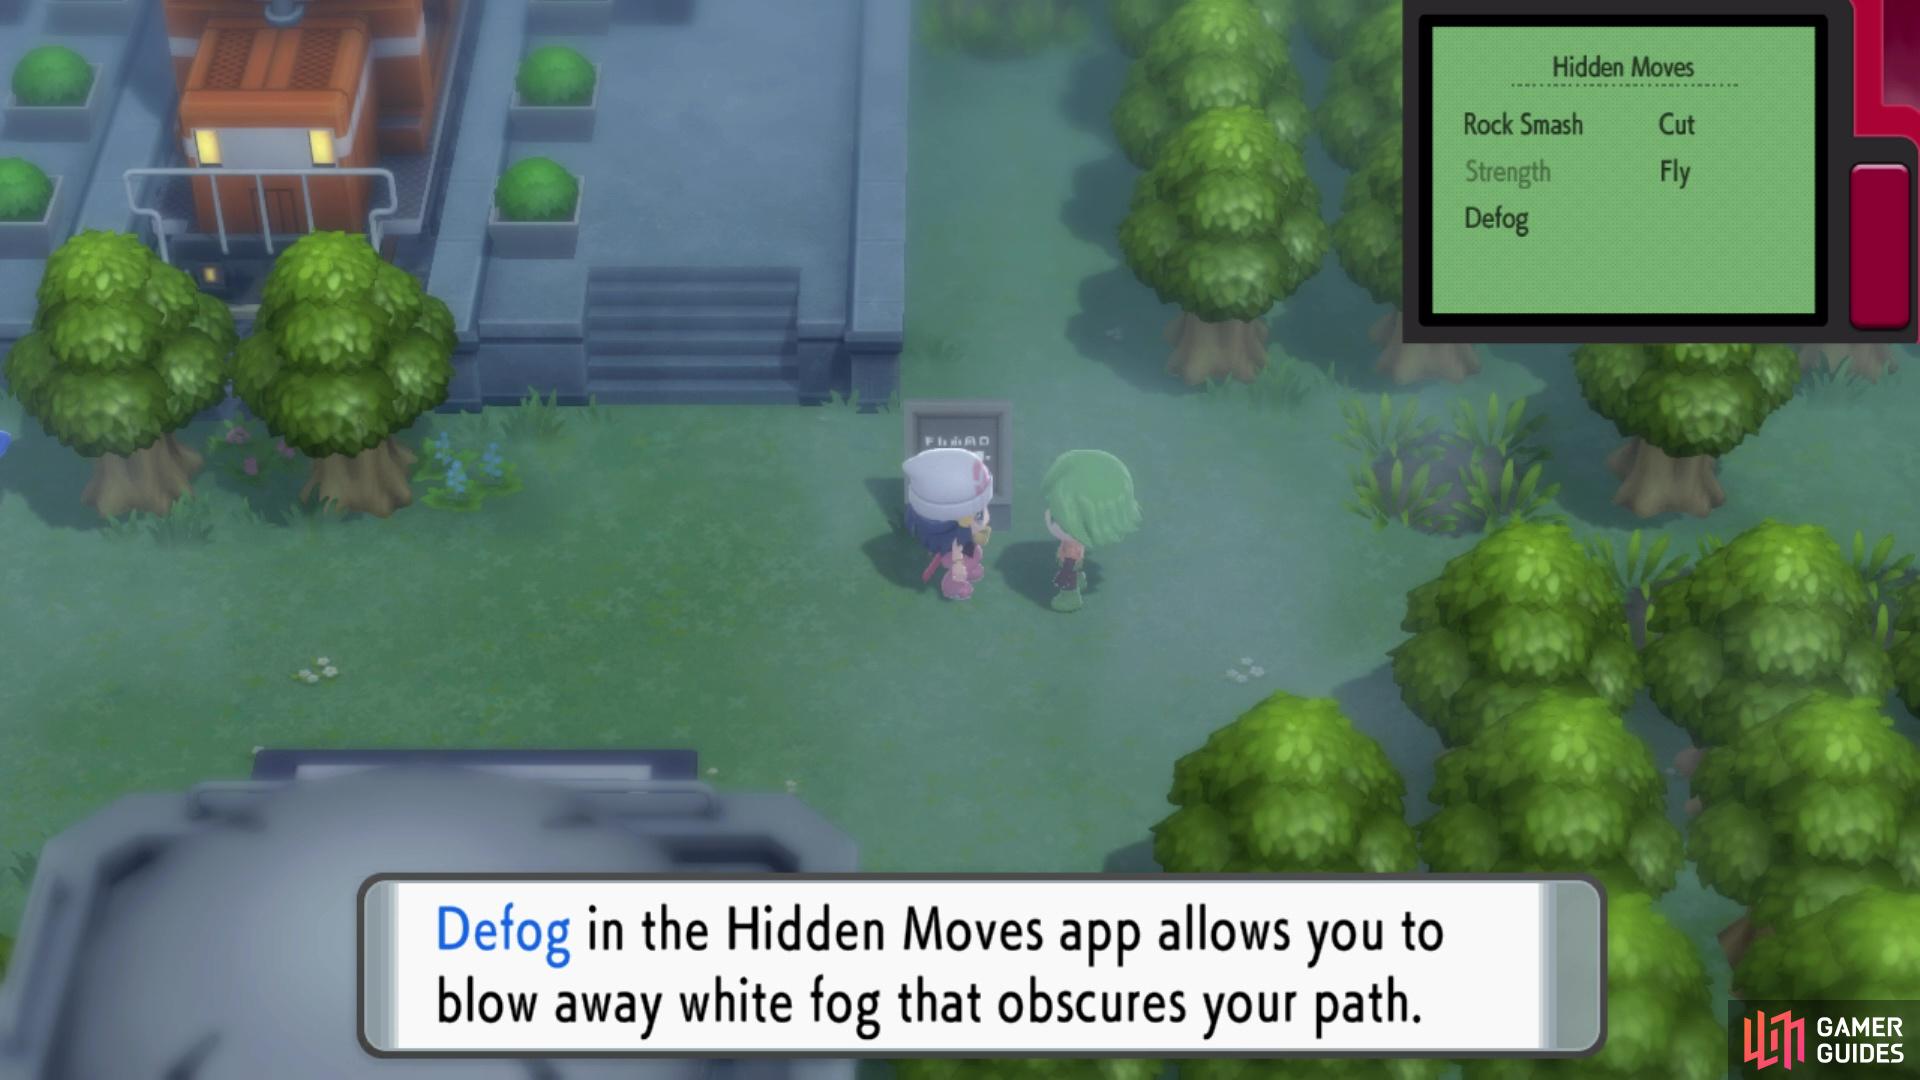 Defog is a hidden move that allows you to blow away fog that obscures your path.